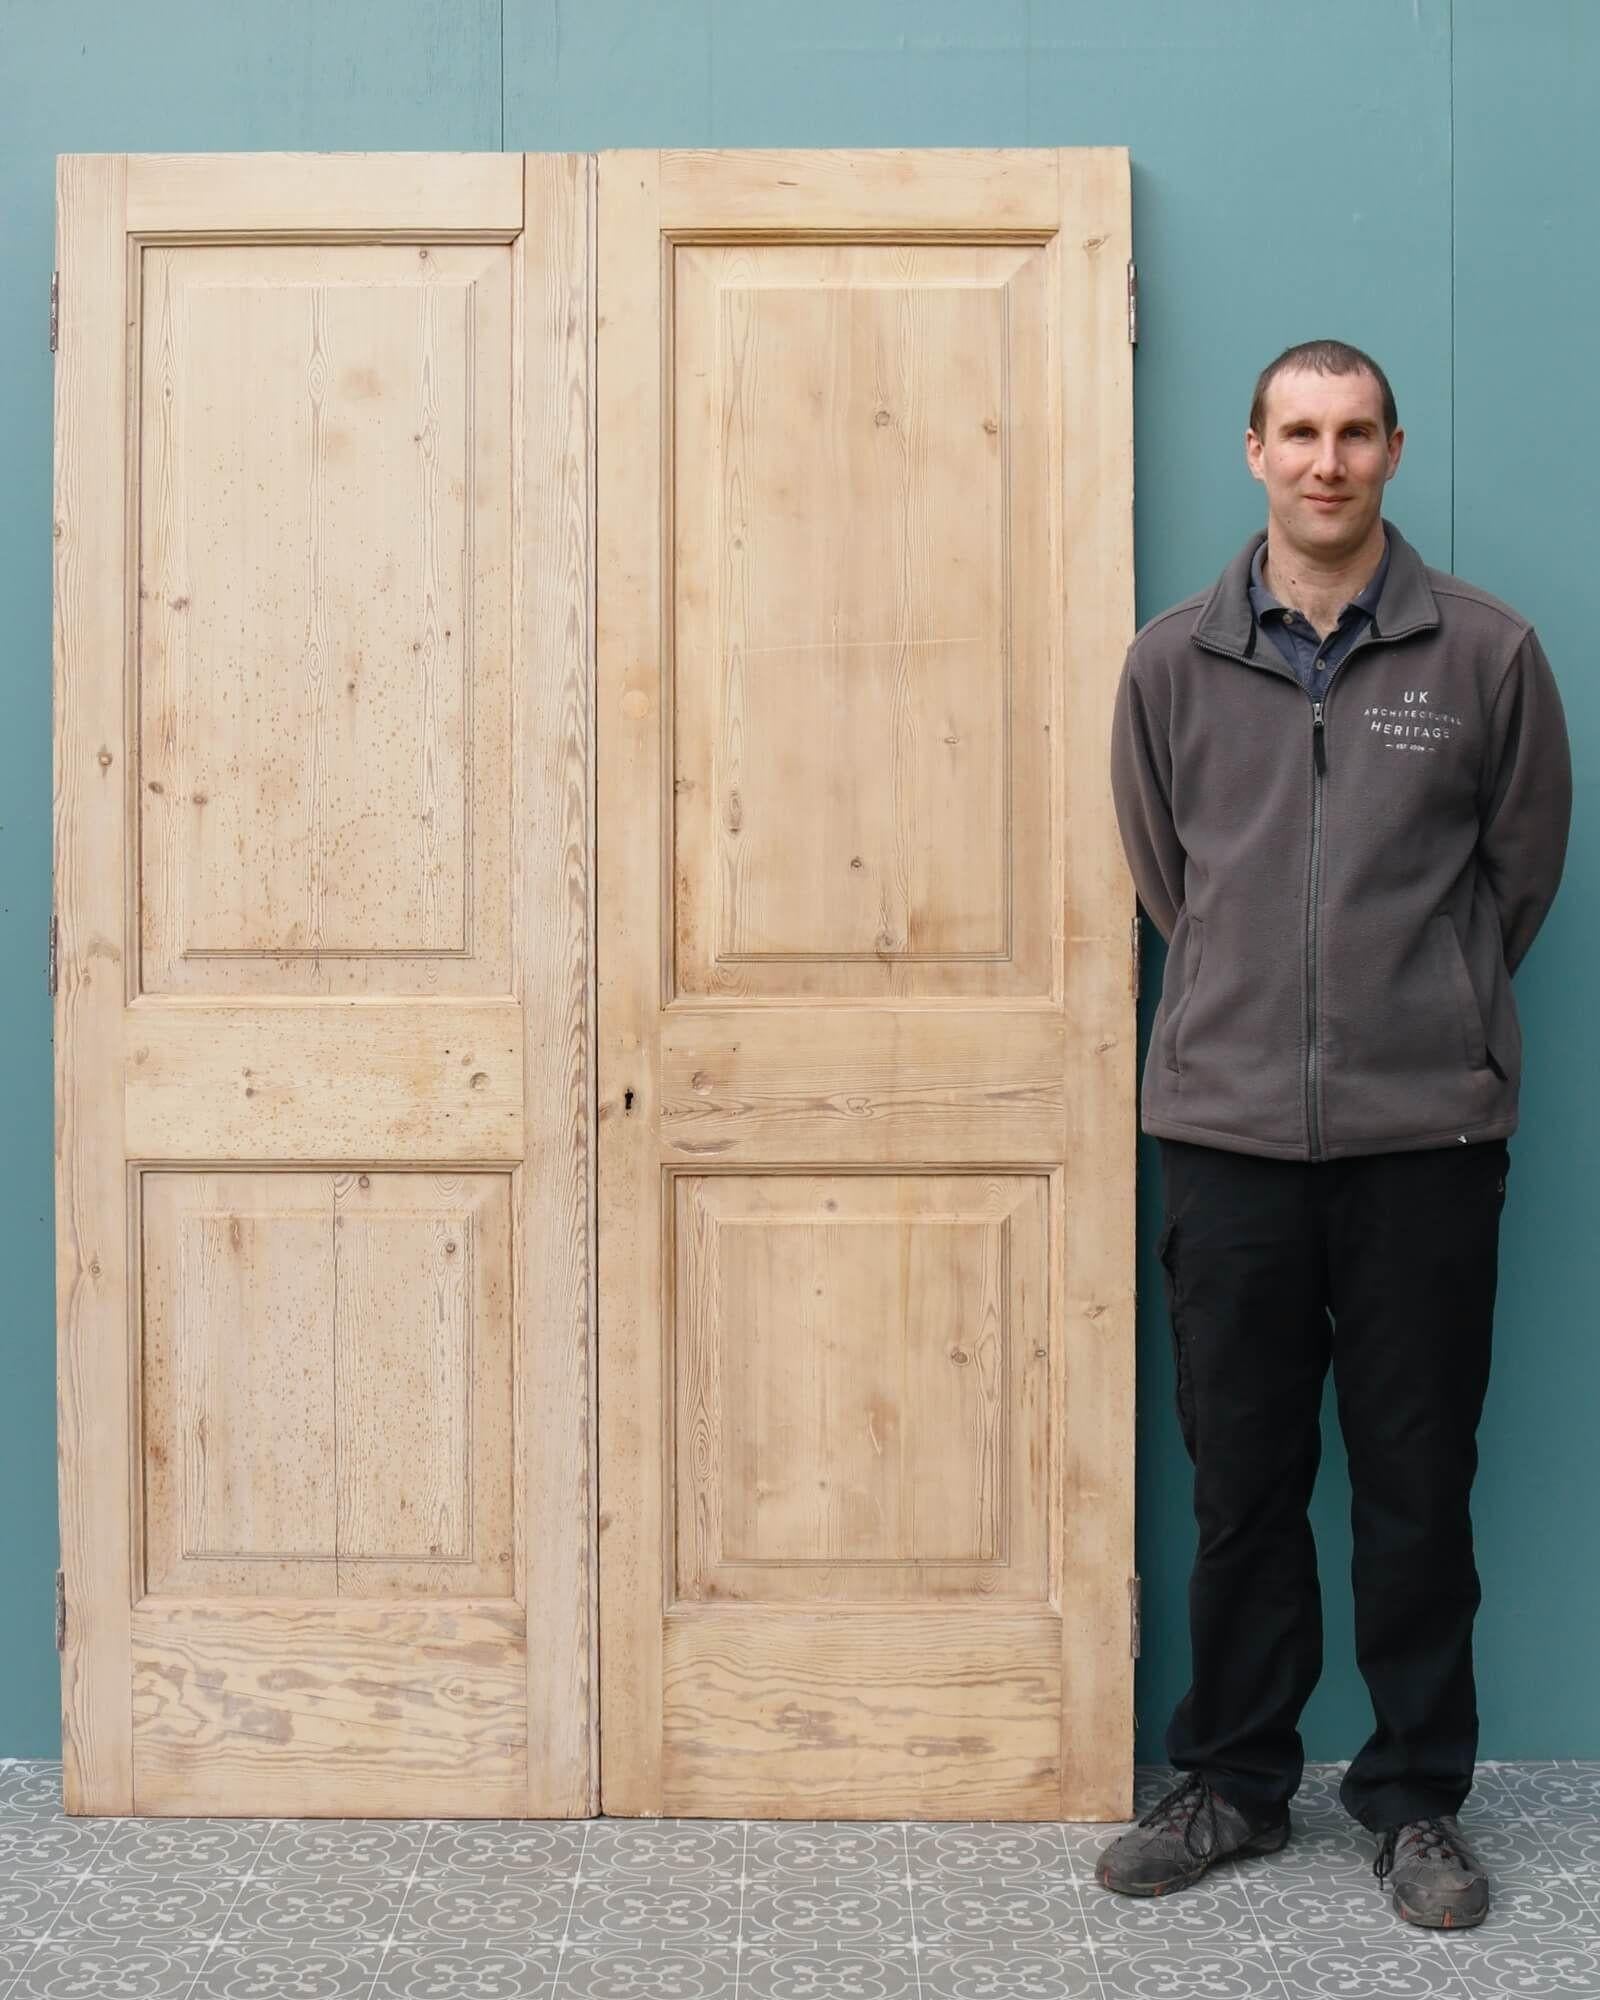 A pair of reclaimed stripped pine double doors in 2-panel Edwardian style dating from the early 20th century. These versatile antique double doors are suitable for internal or exterior use, making a beautiful set of room dividing doors or exterior